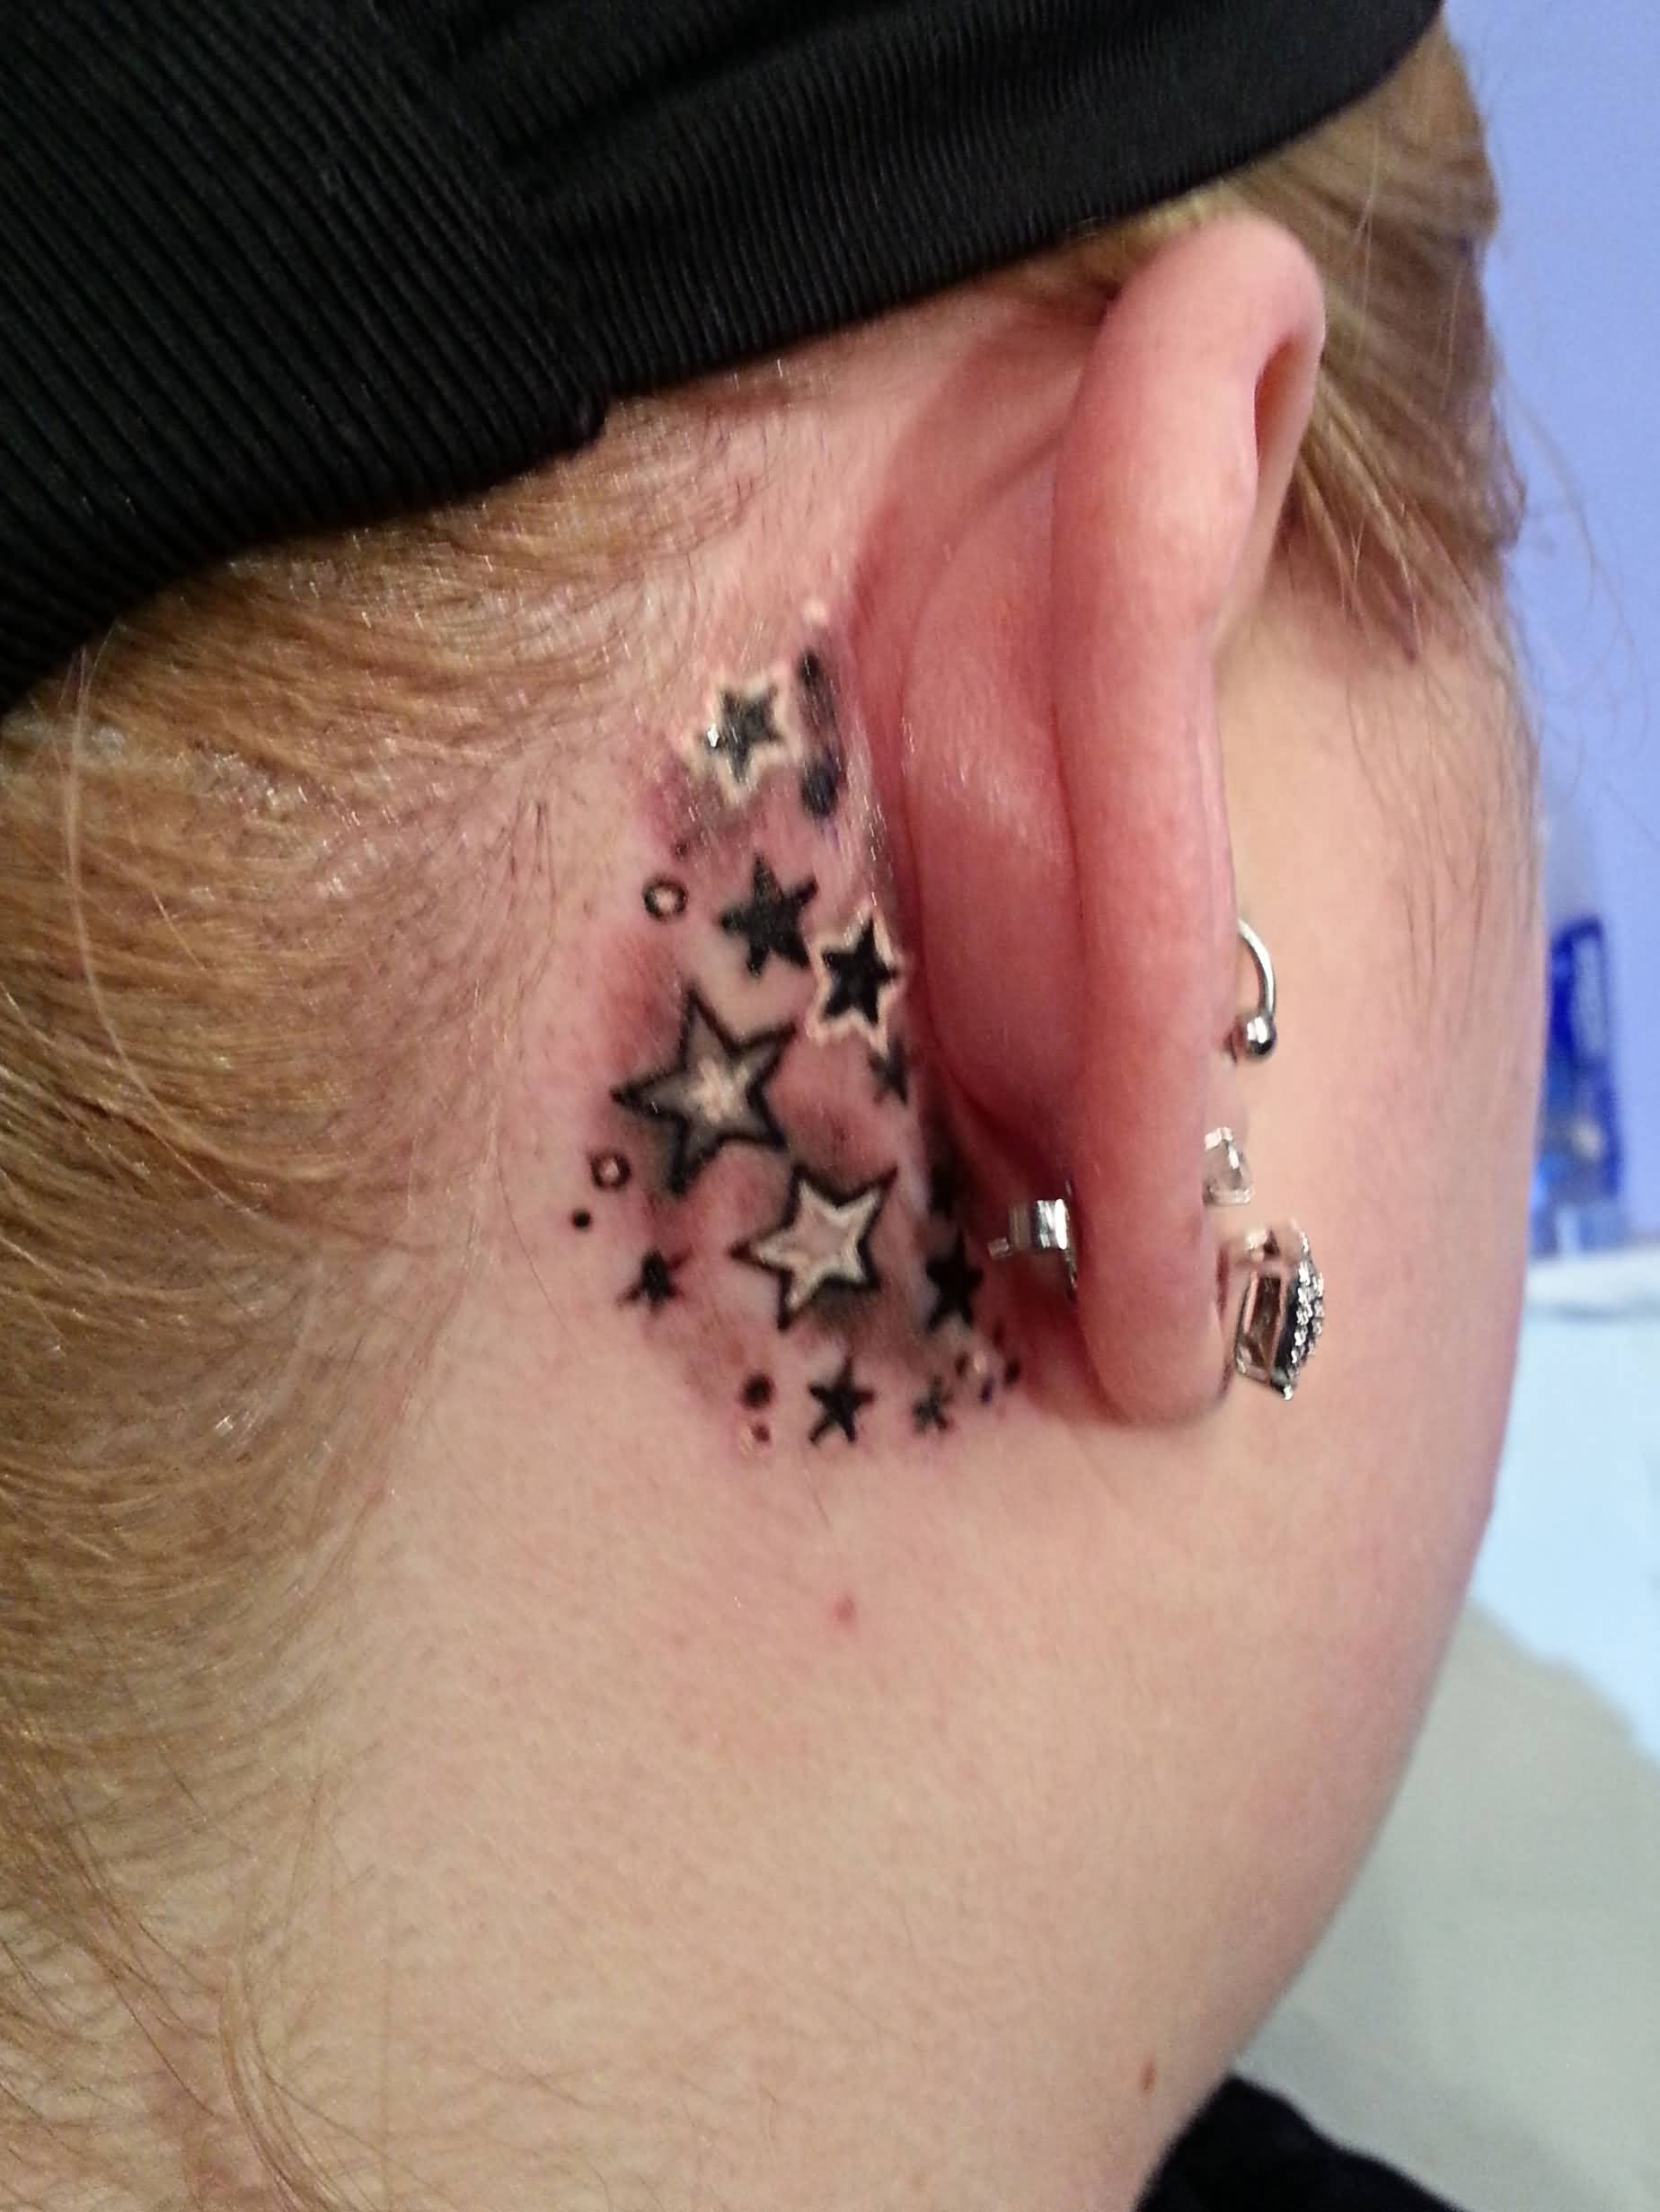 White And Black Ink Star Tattoos Behind Ear